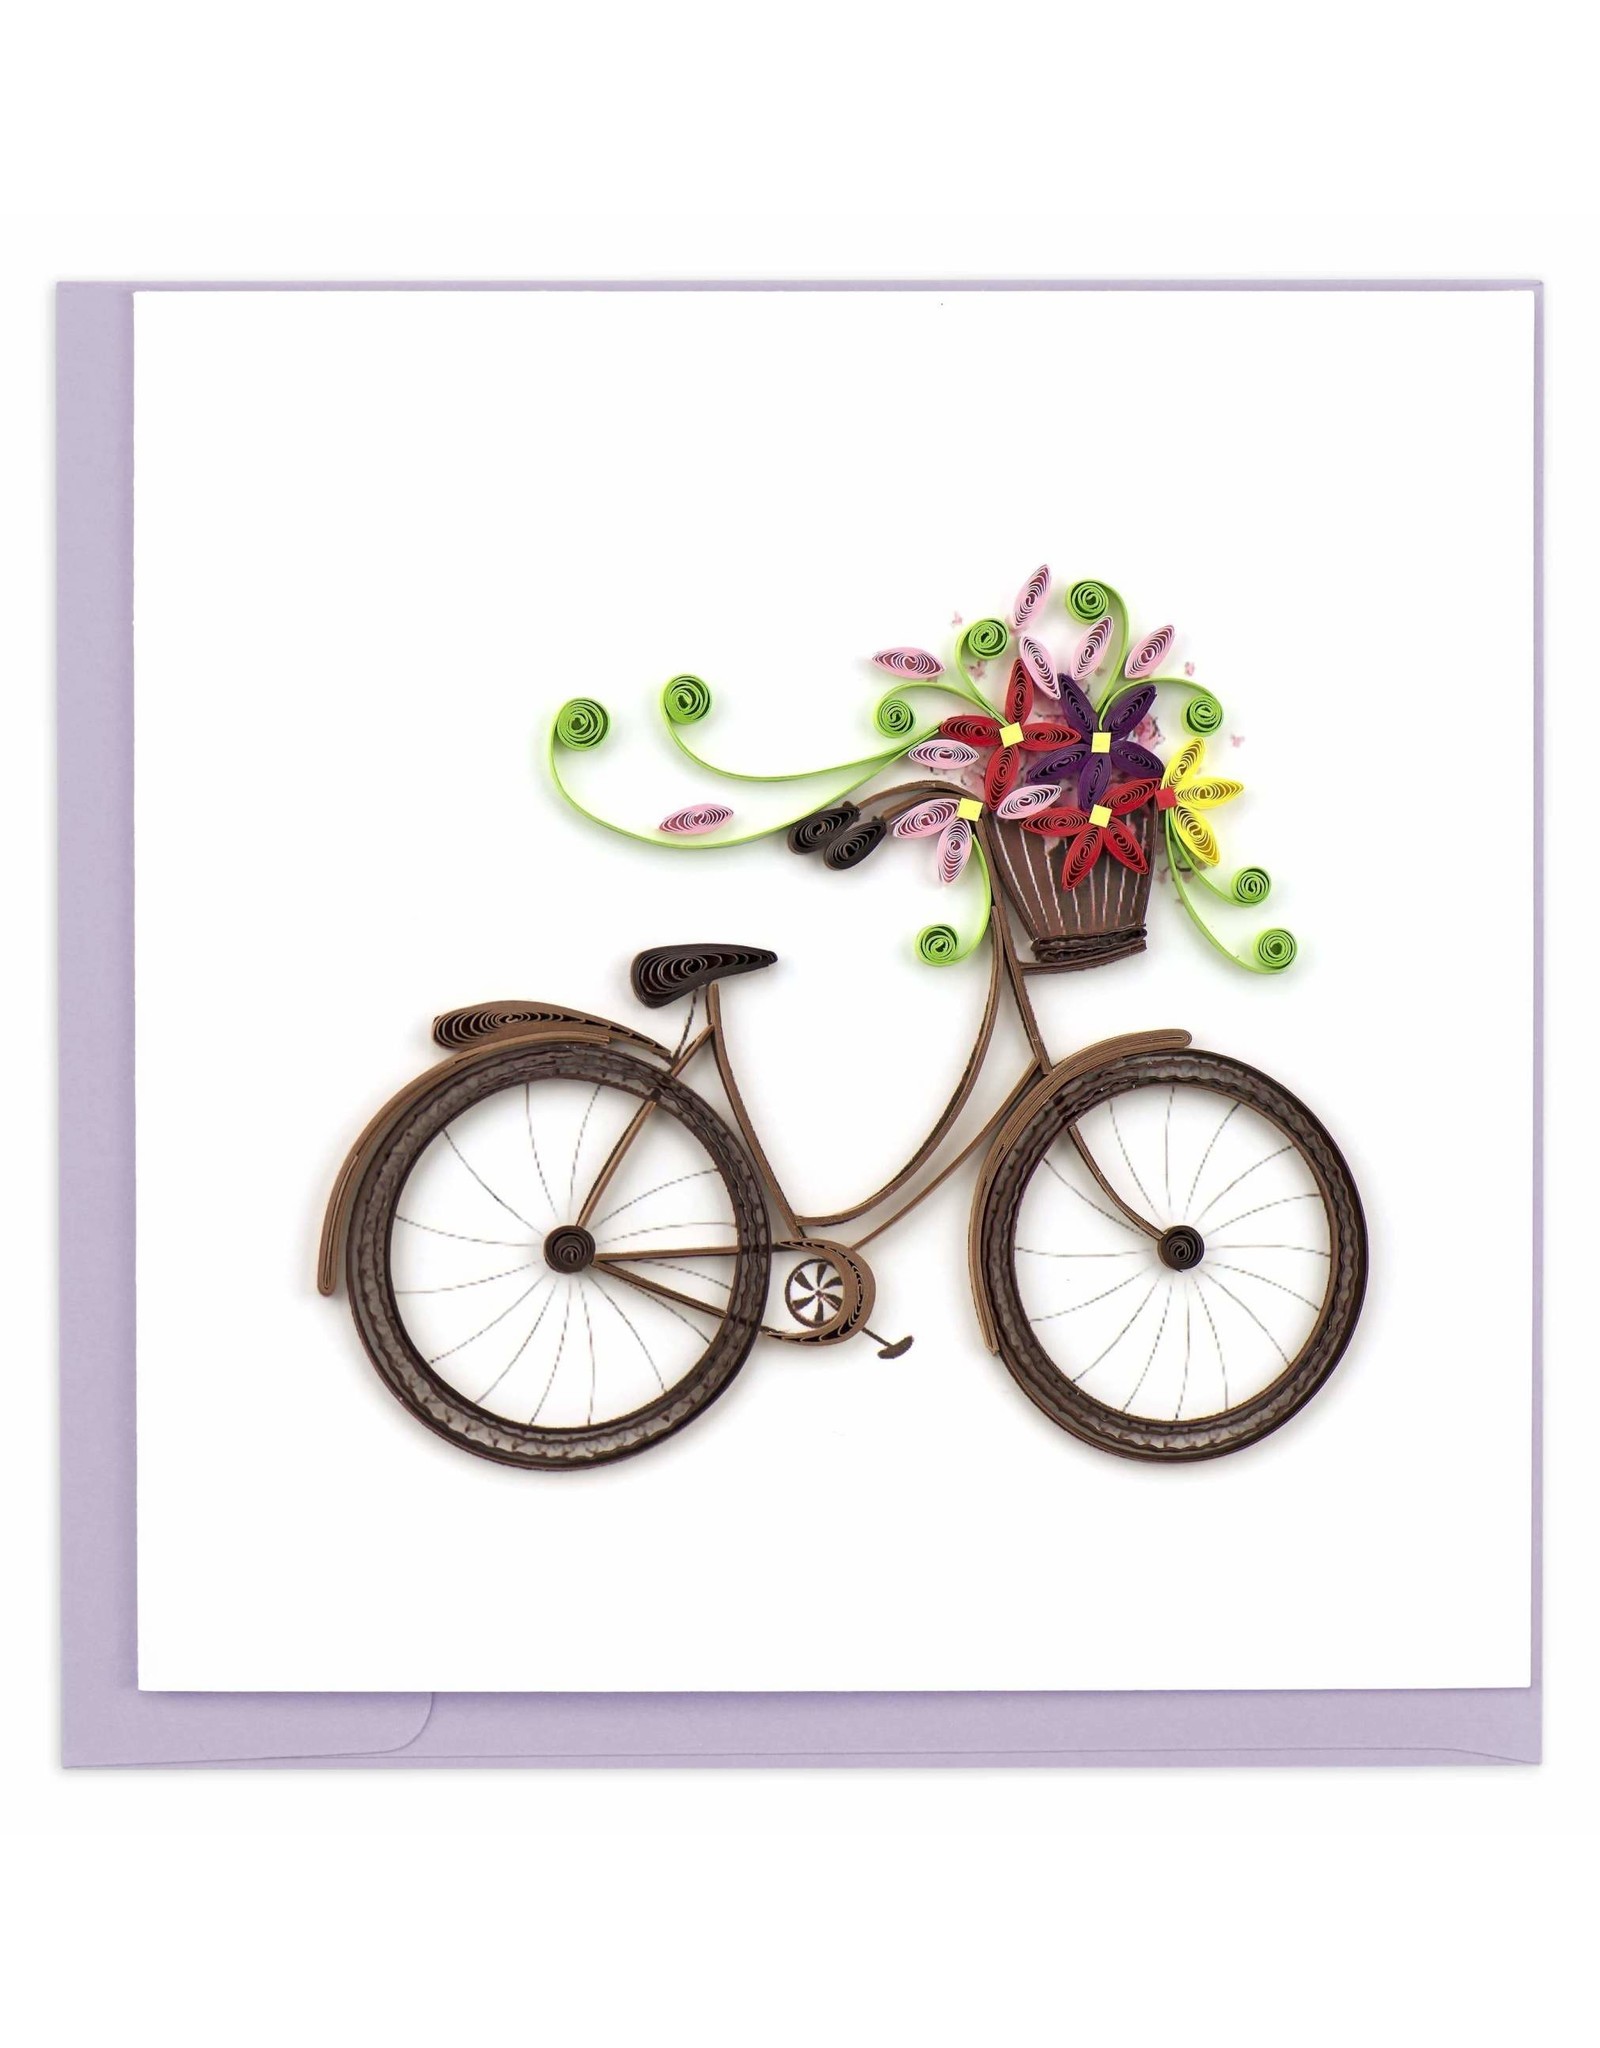 Quilling Card Quilled Bicycle with Flower Basket Greeting Card